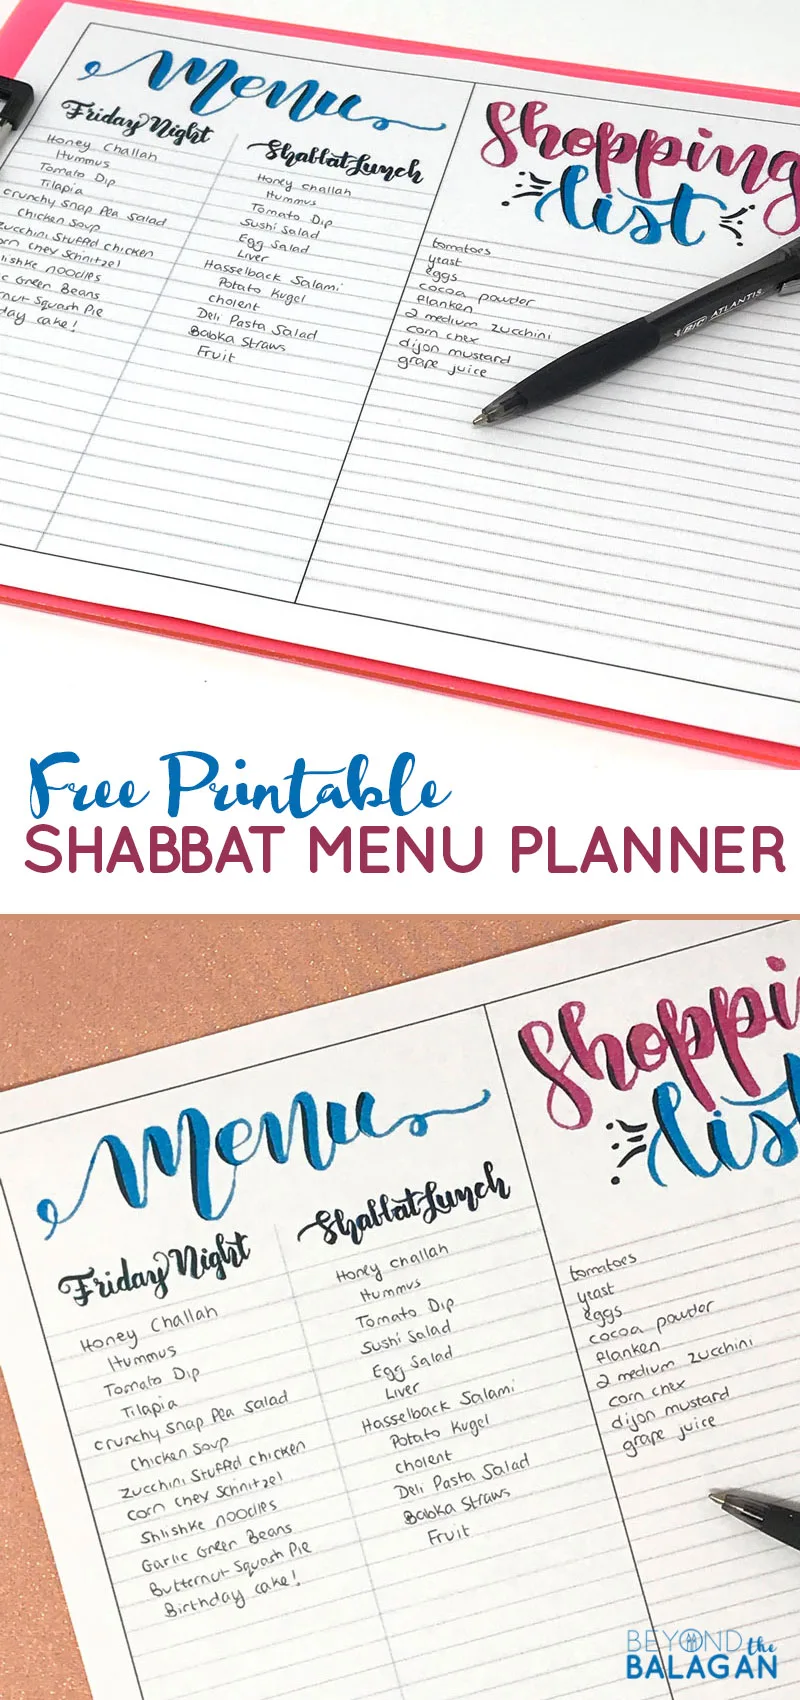 Click to grab your FREE printable copy of this beautiful brush lettered Shabbat menu planner - perfect for Shabbos meal planning! You'll love this resource to make prepping for the Jewish sabbath easier! #shabbat #shabbos #jewishholidays